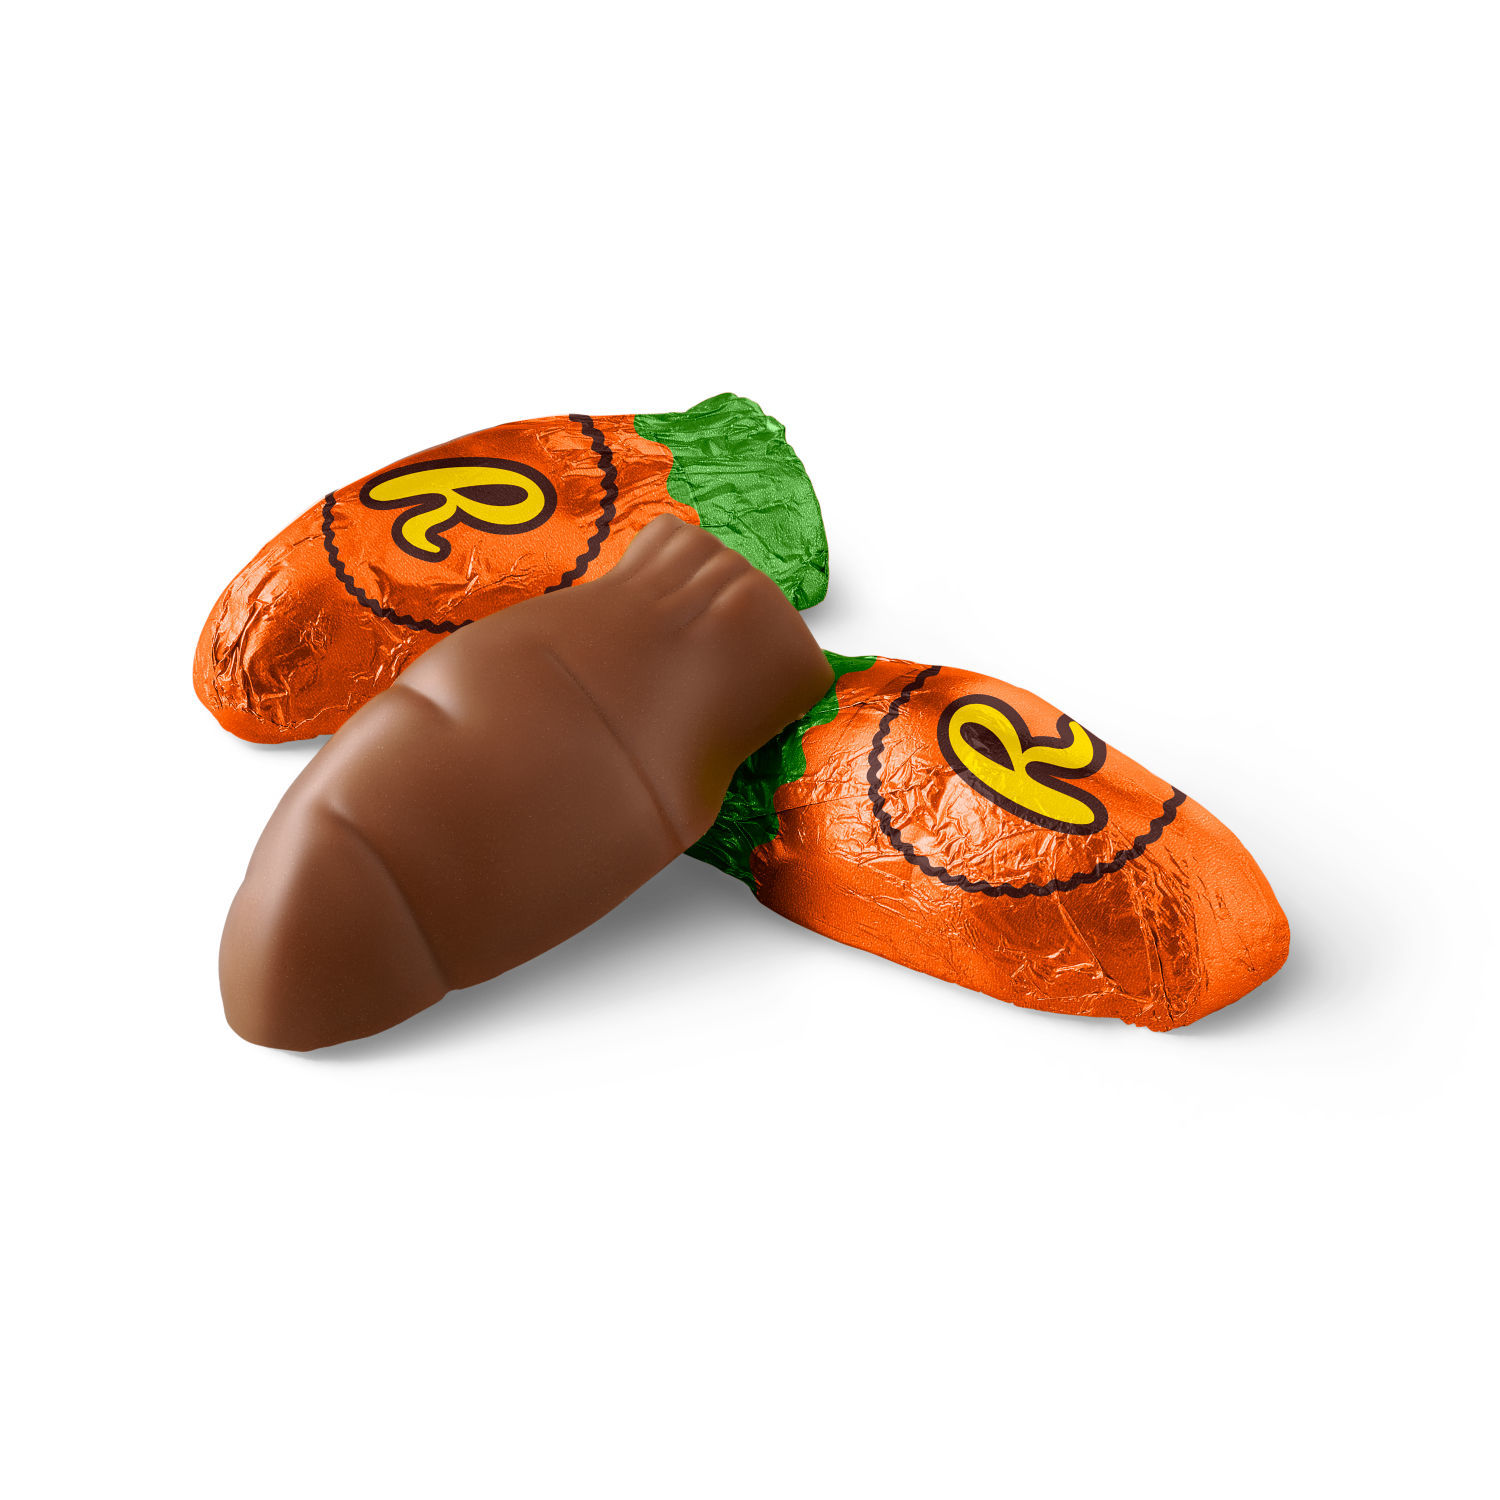 Reese's Milk Chocolate Peanut Butter Creme Carrots Easter Candy, Bag 9 oz - image 4 of 8